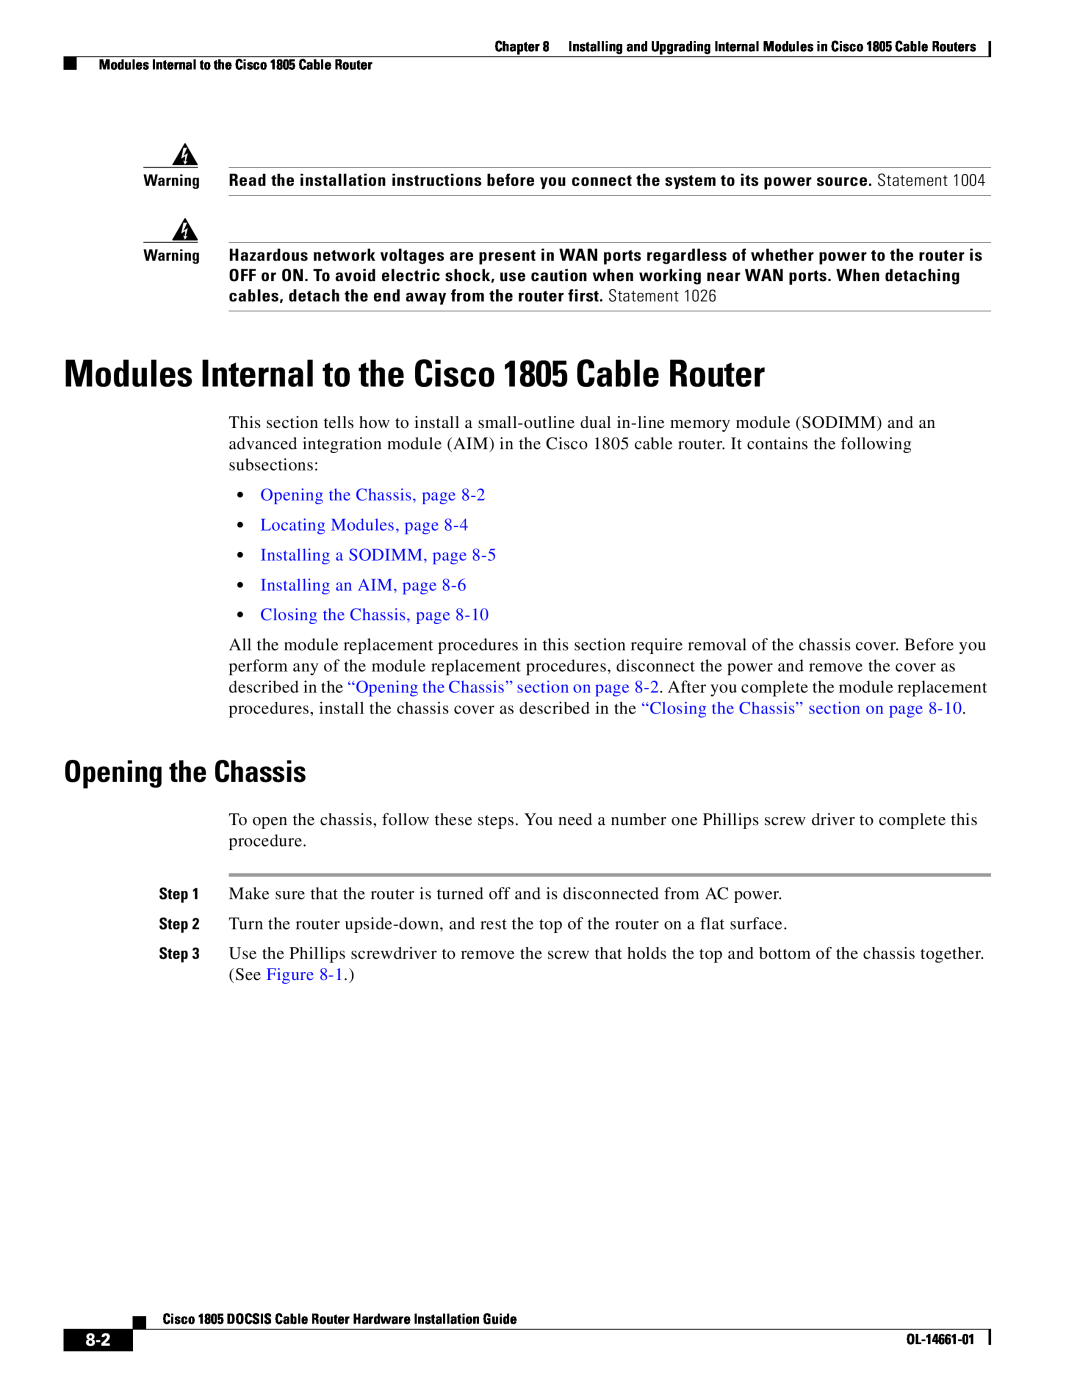 Cisco Systems manual Modules Internal to the Cisco 1805 Cable Router, Opening the Chassis, Closing the Chassis, page 